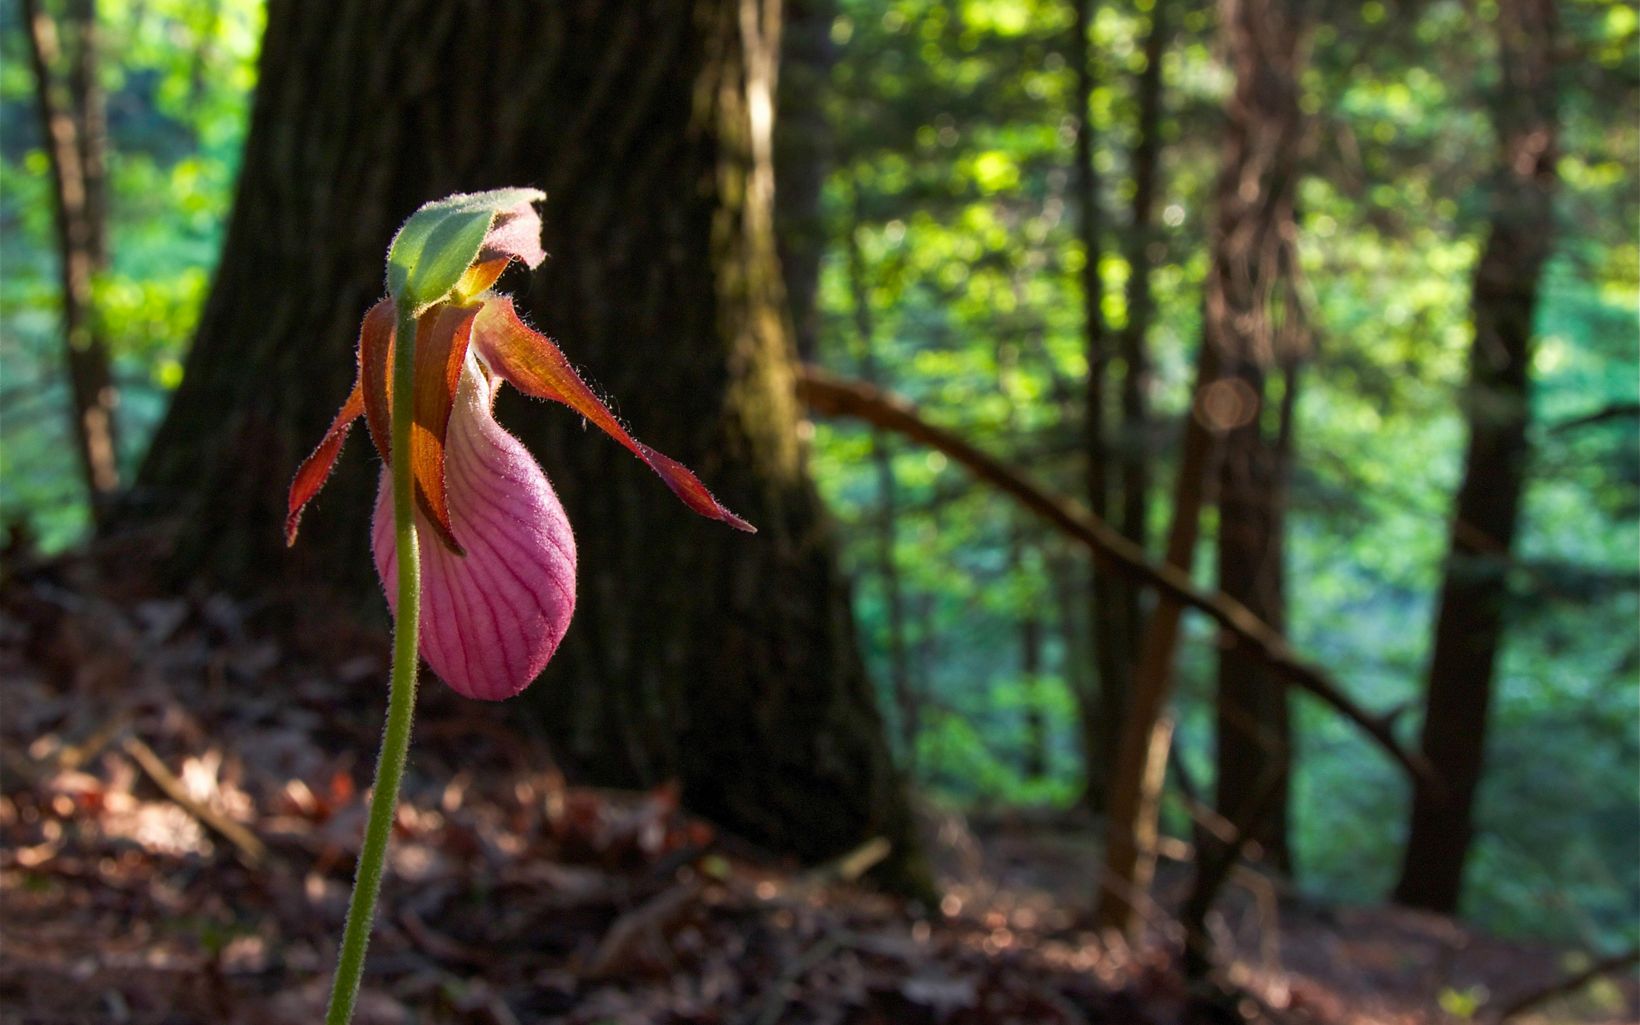 Pink Lady Slipper Pink lady slippers can be spotted along the trails of the Maurice River Bluffs preserve in the spring. © Steve S. Meyer